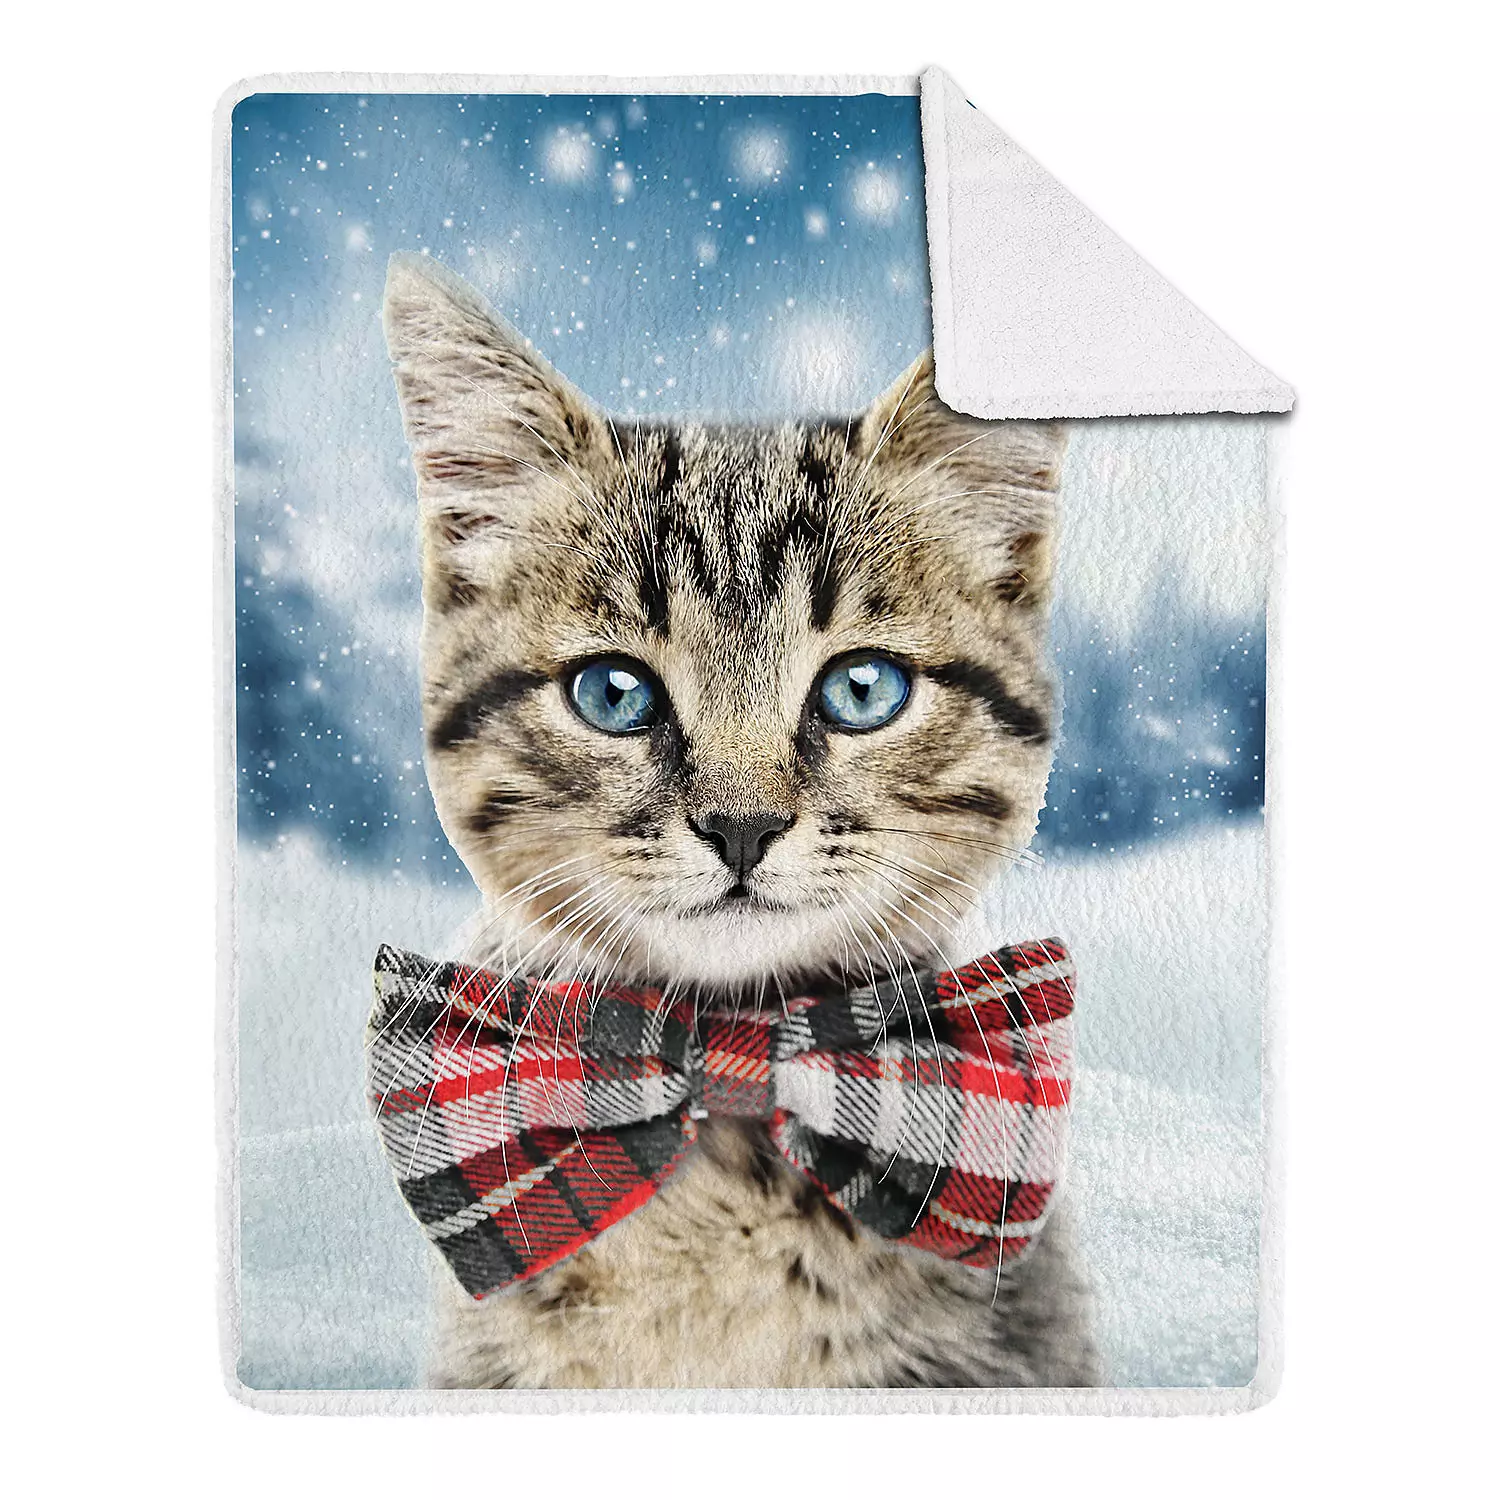 Printed photoreal throw with sherpa backing, cat with bow tie, 48"x60"